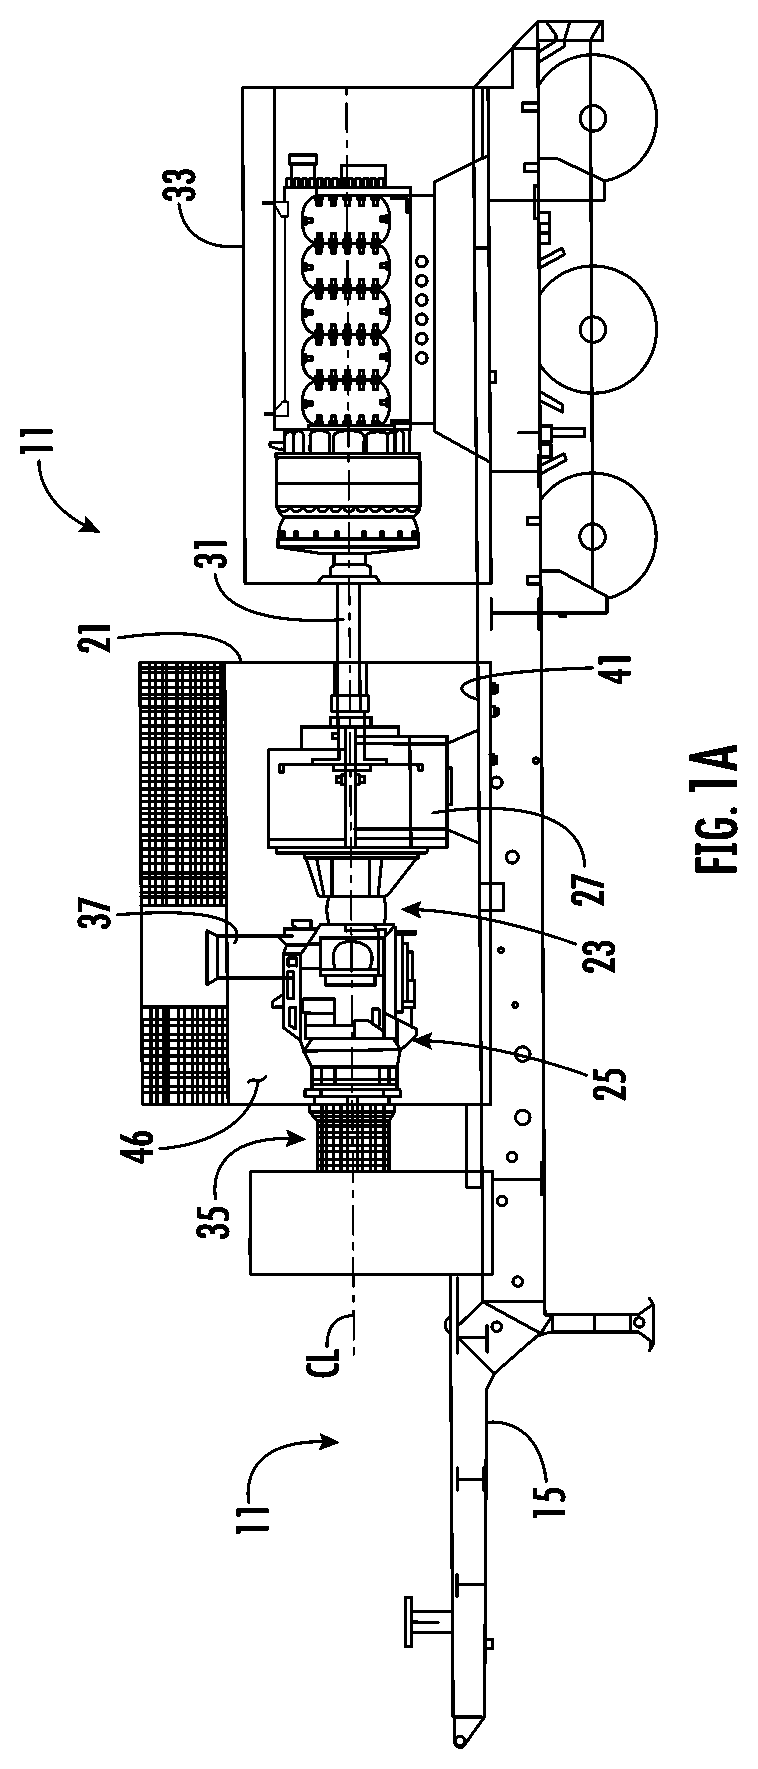 Direct drive unit removal system and associated methods